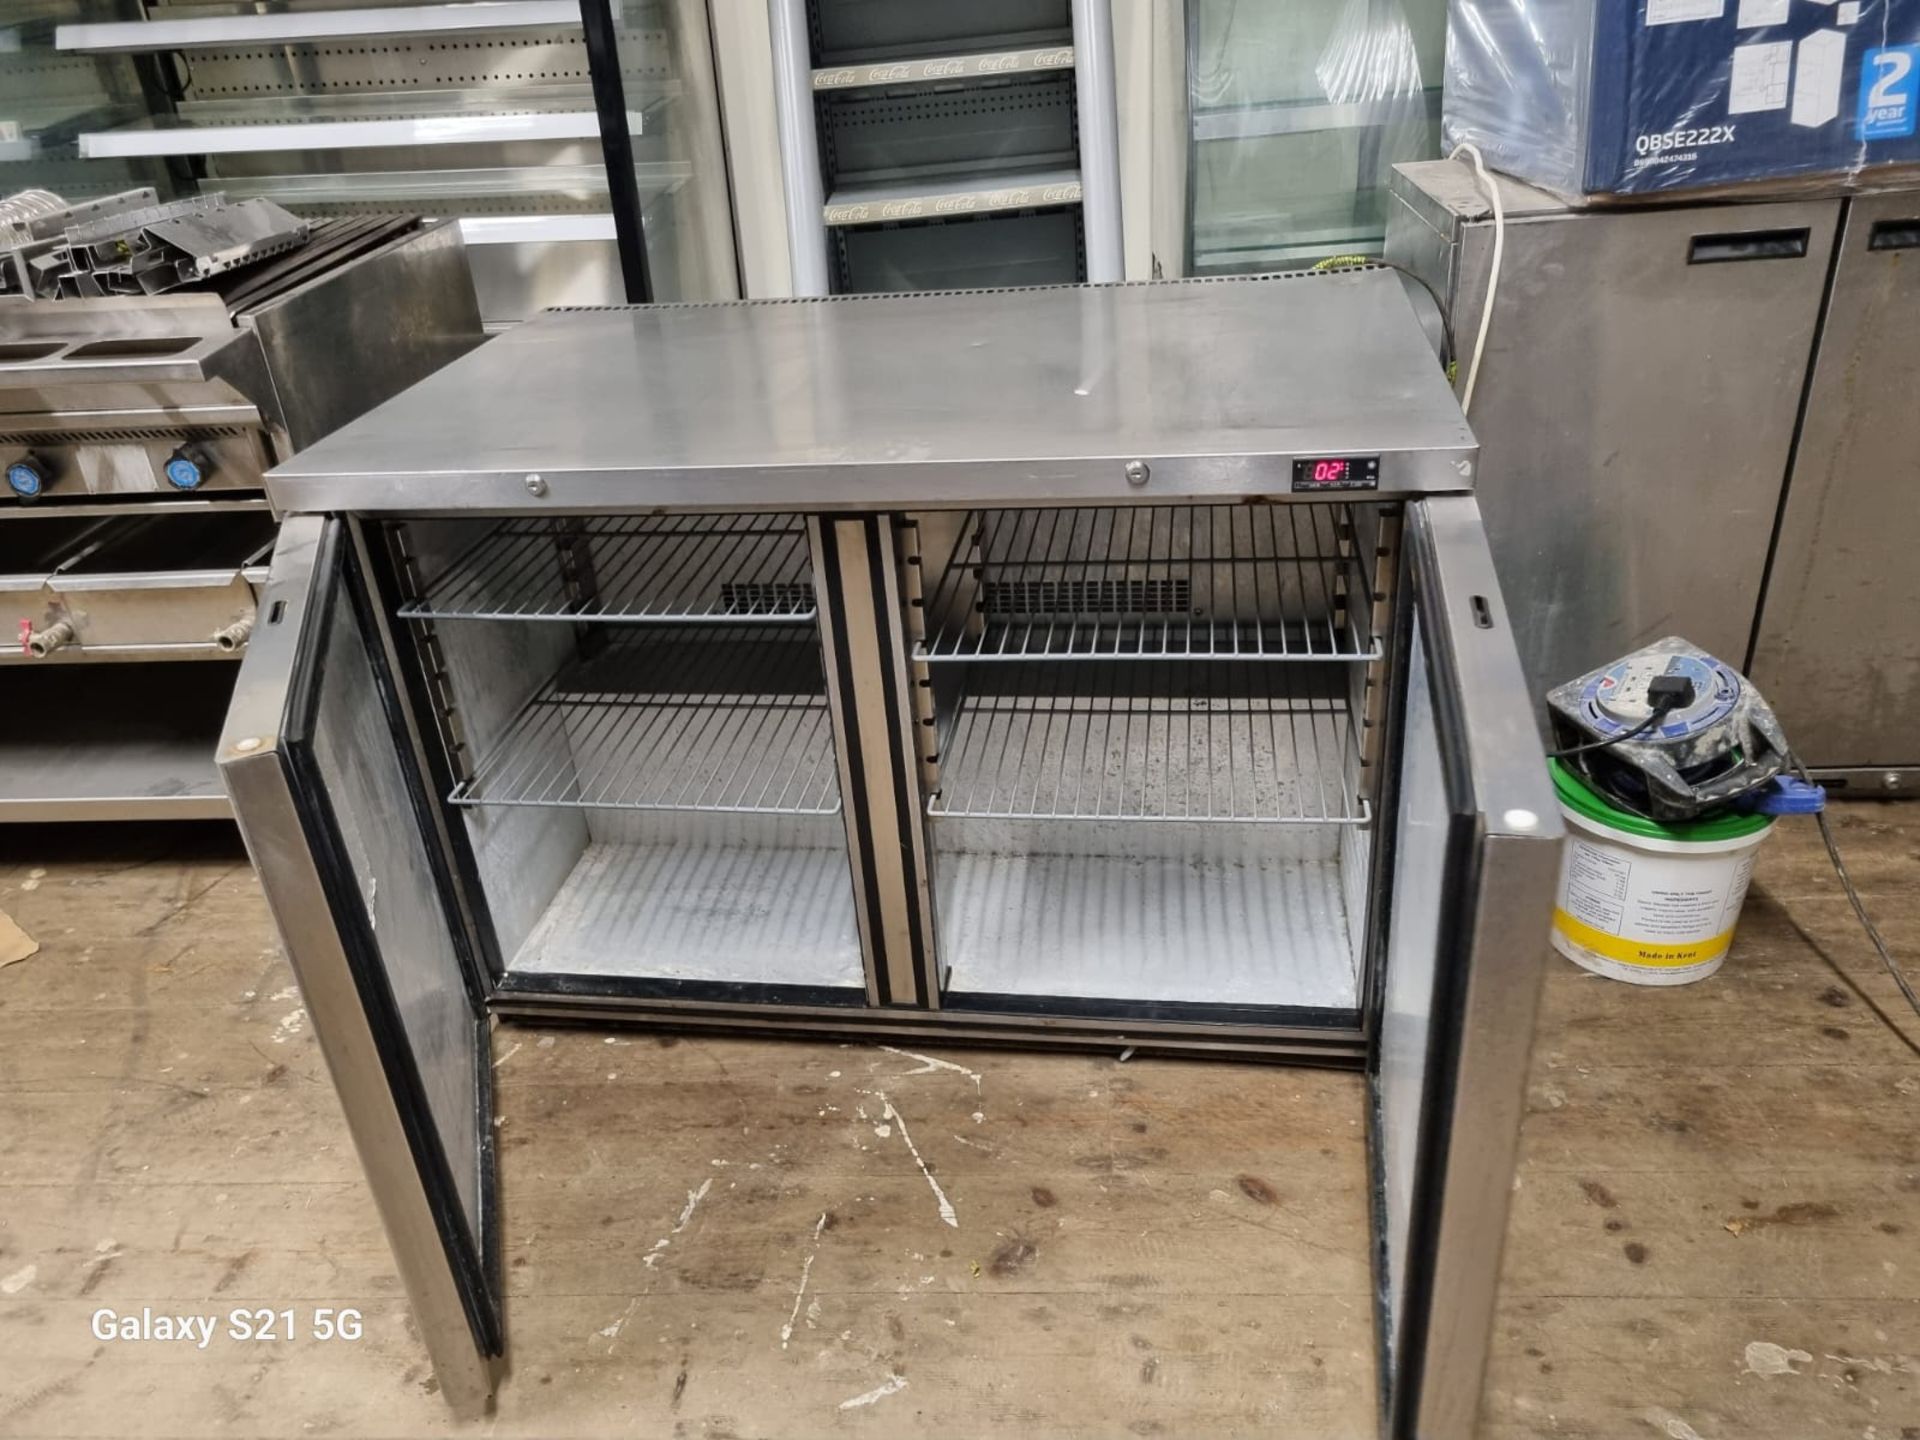 FOSTER HR360 UNDER COUNTER FRIDGE - 1200 MM W 700 MM D - FULLY WORKING - Image 6 of 6